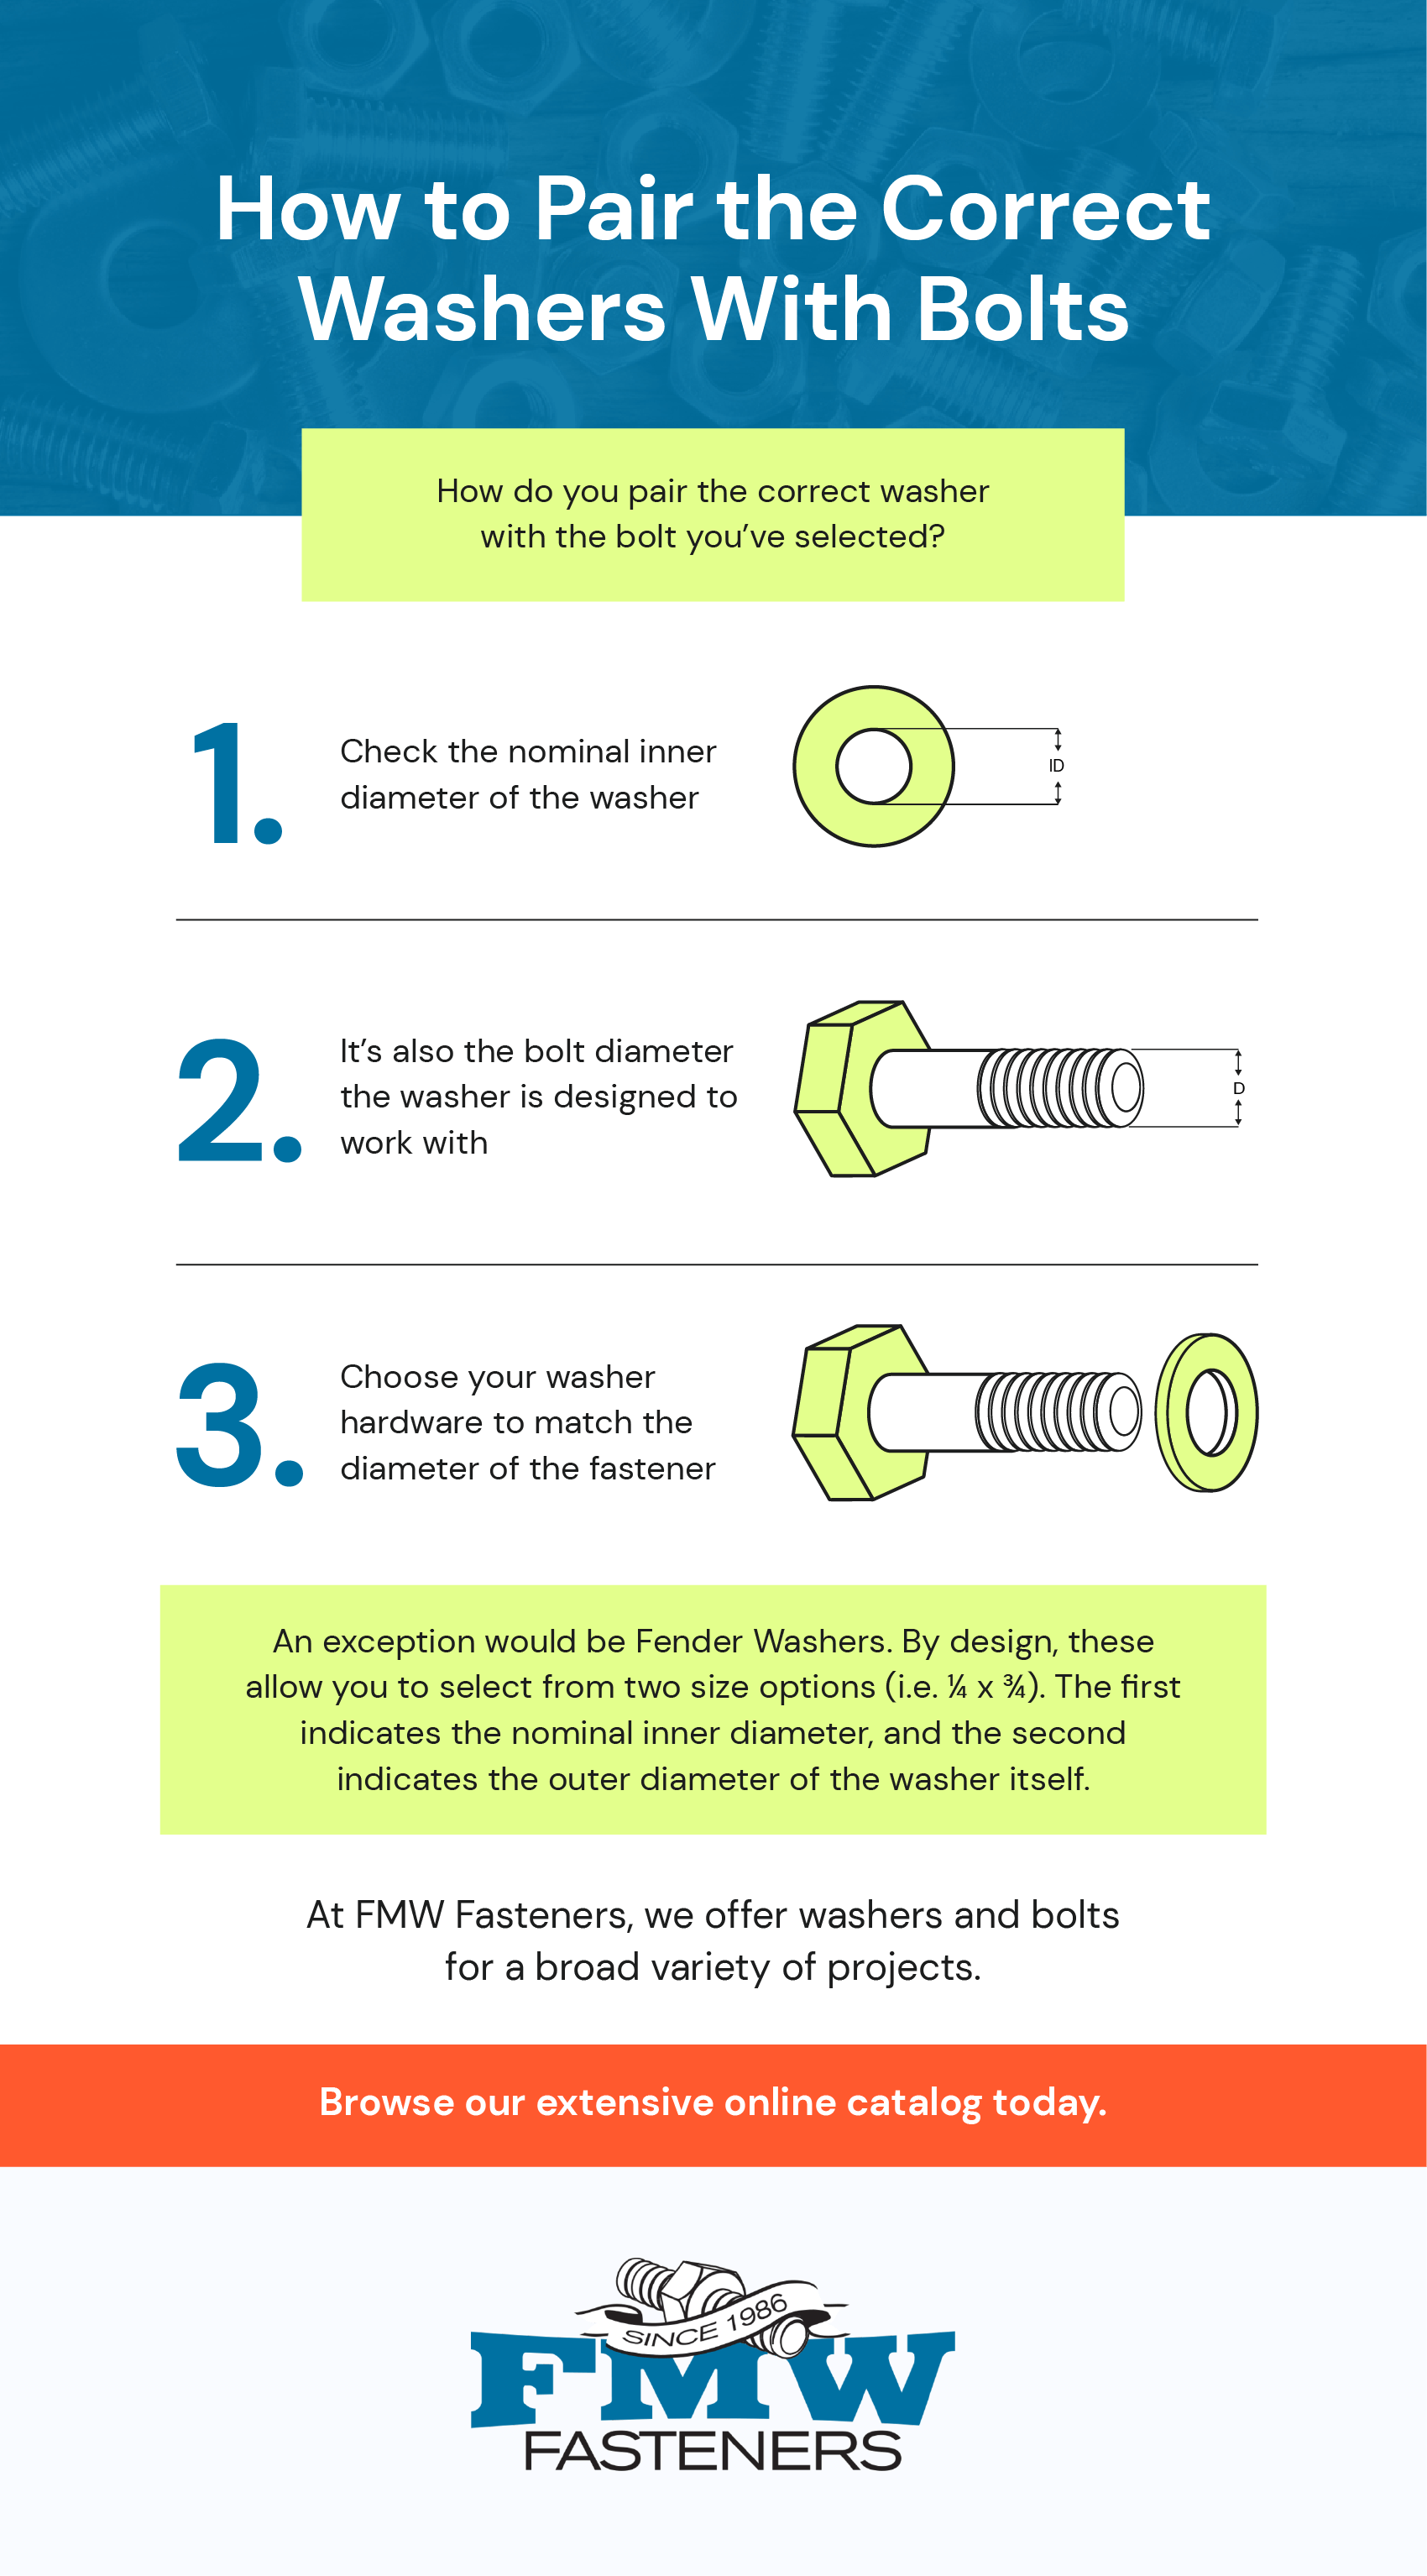 how to pair the correct washers with bolts - directions for sizing the washer properly to your bolt